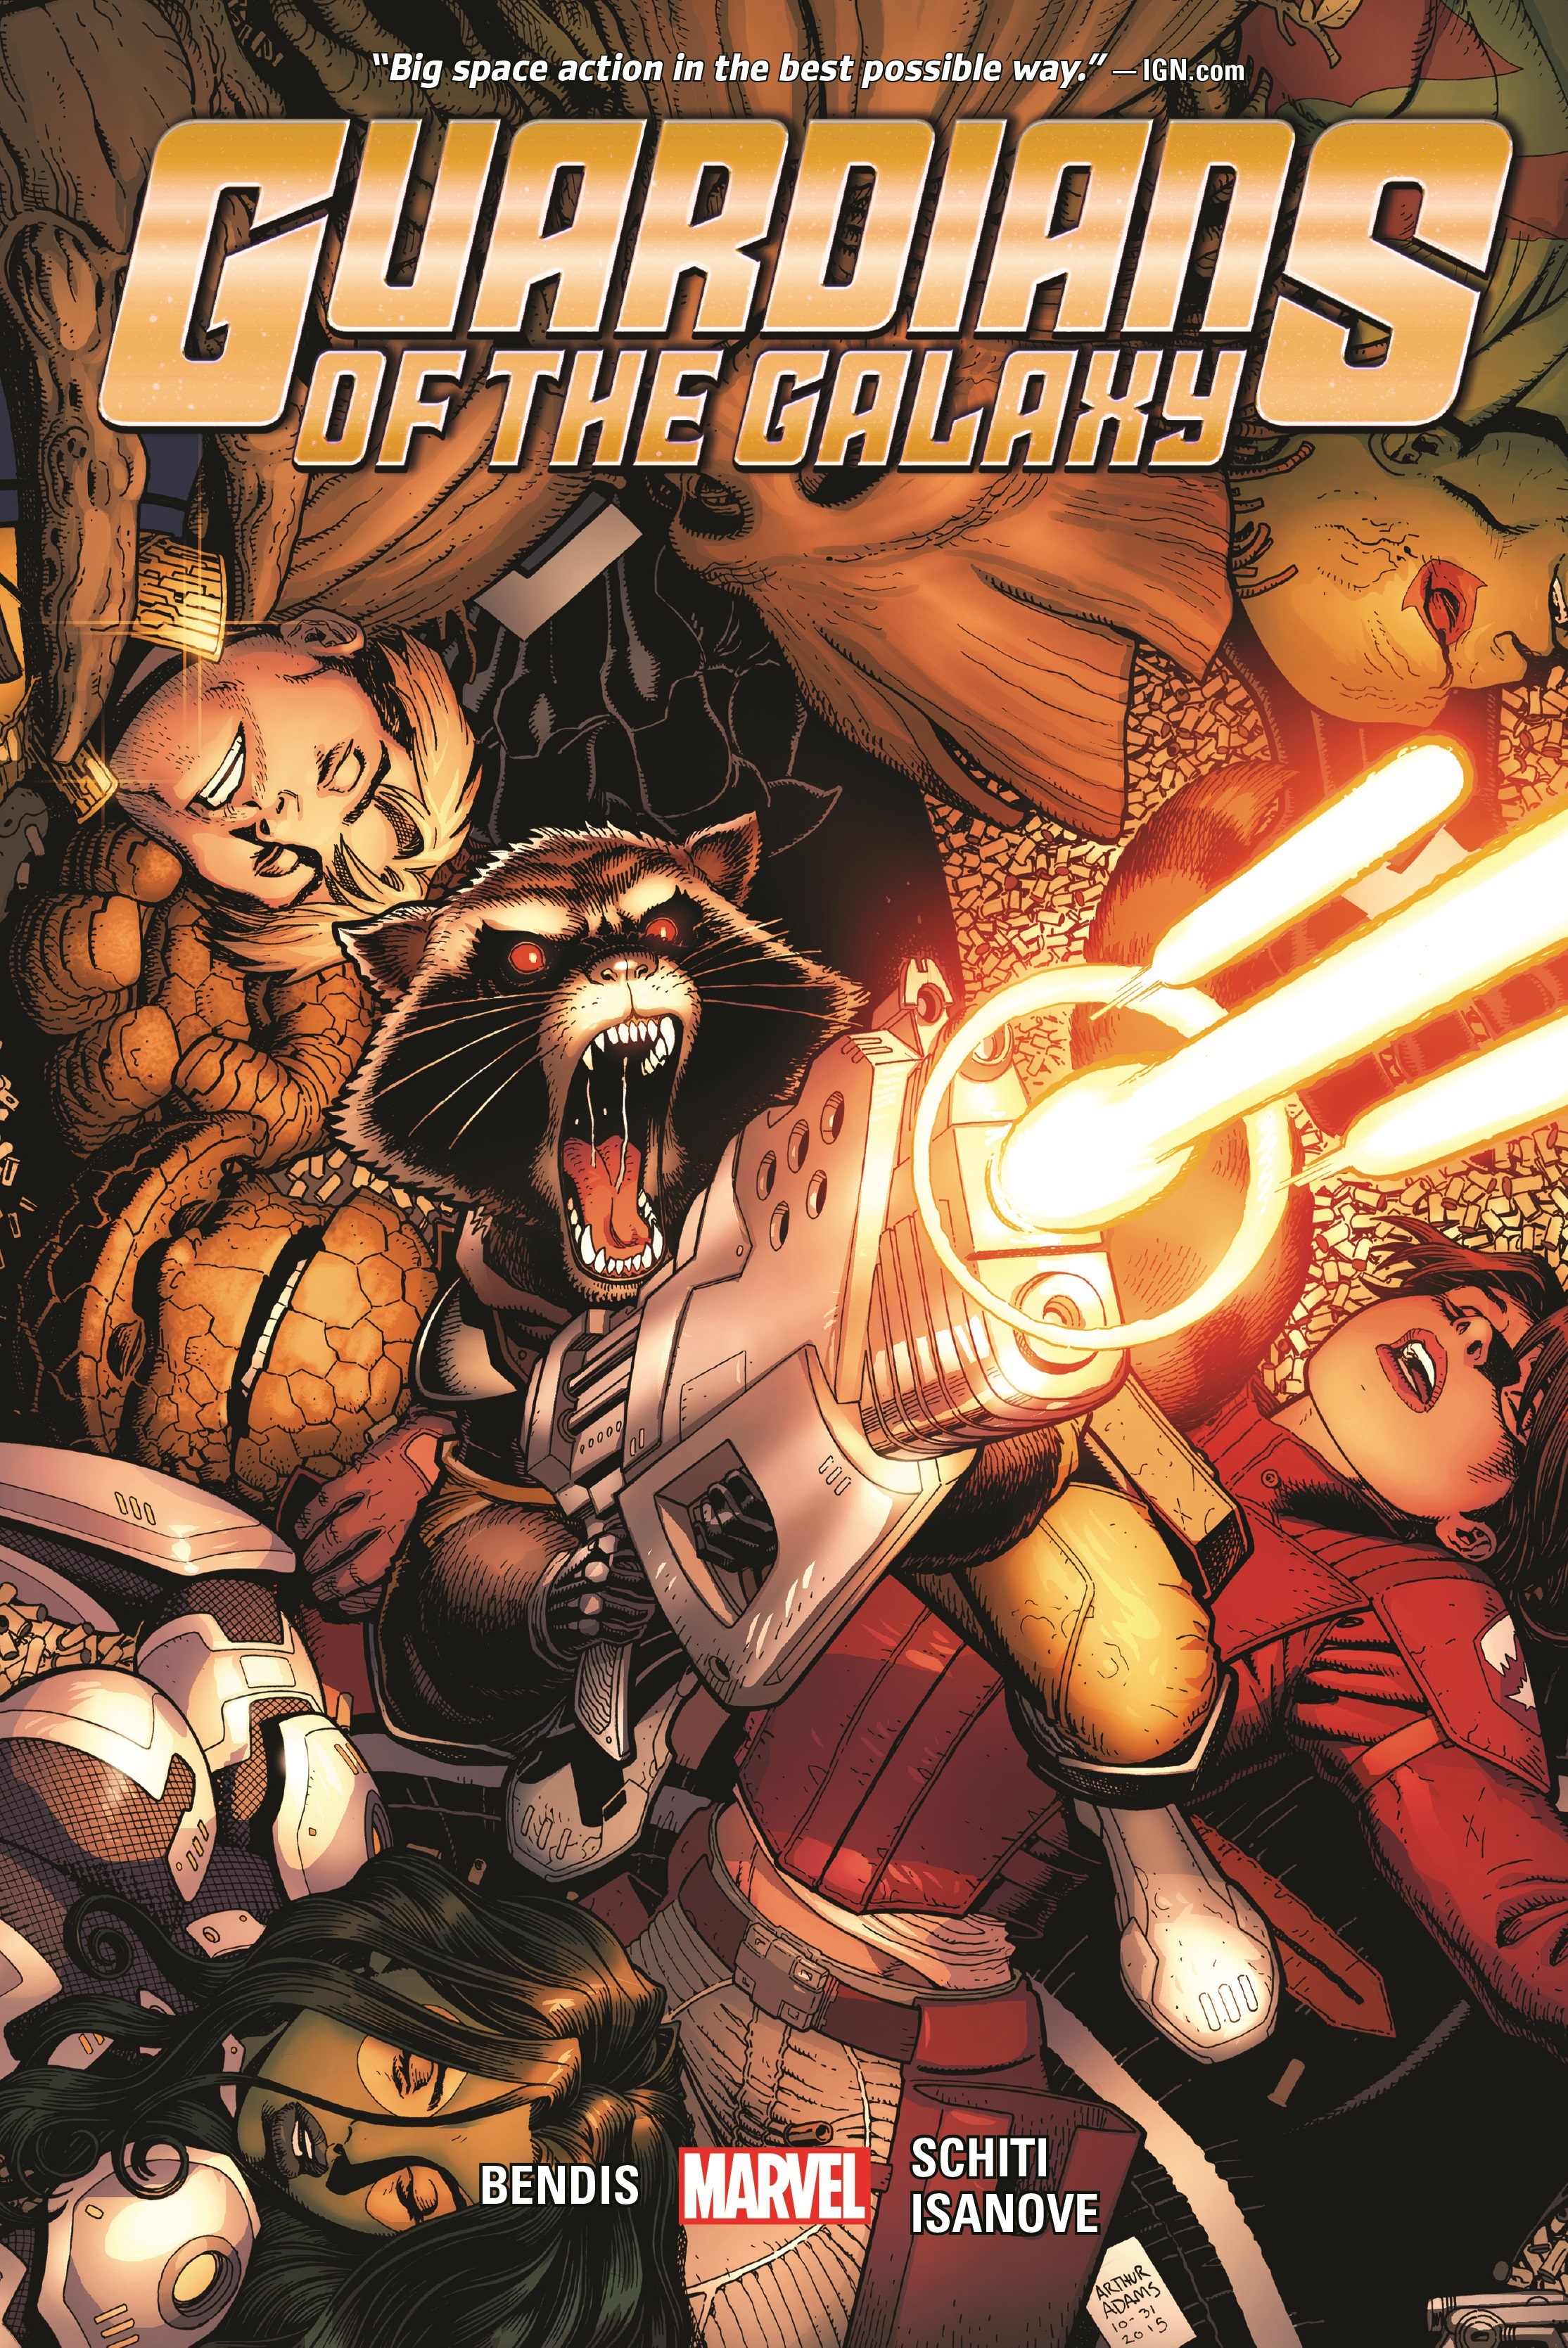 GUARDIANS OF THE GALAXY VOL. 4 HC (Hardcover)